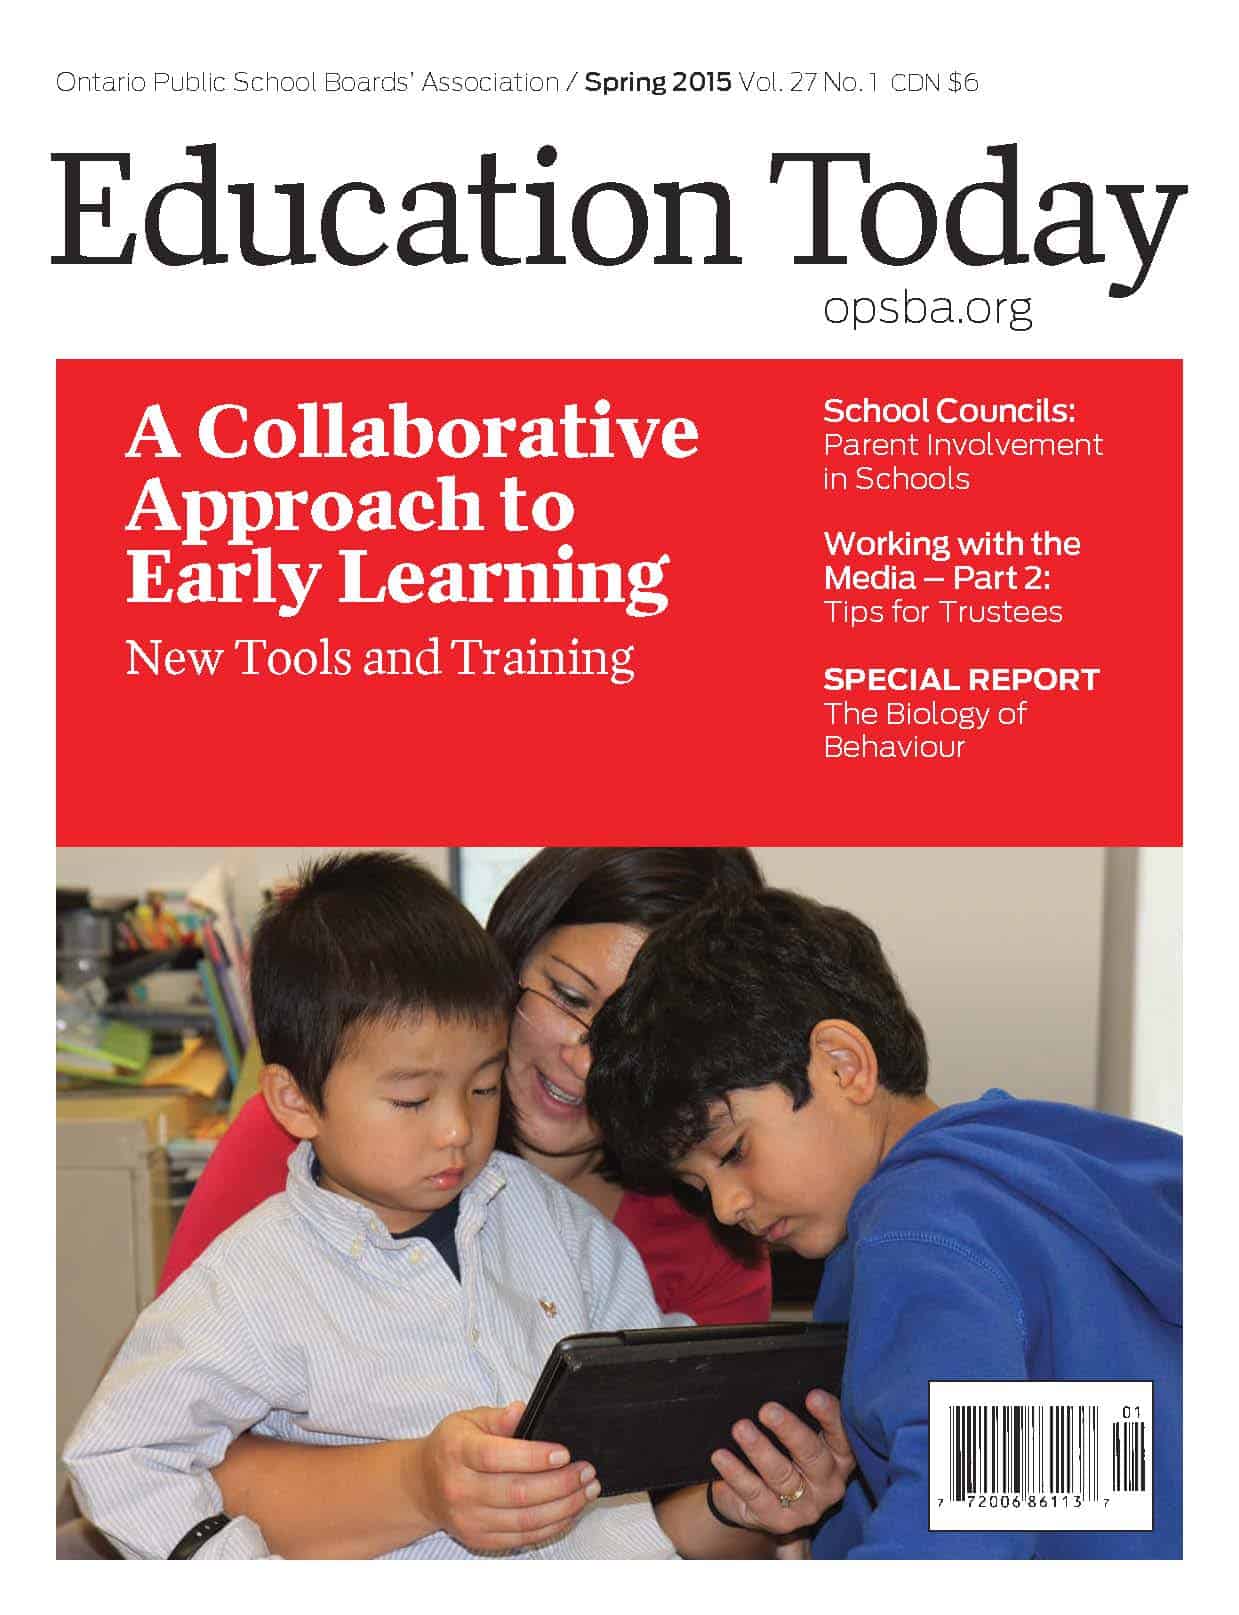 Education Today | Spring 2015 | Volume 27 Number 1